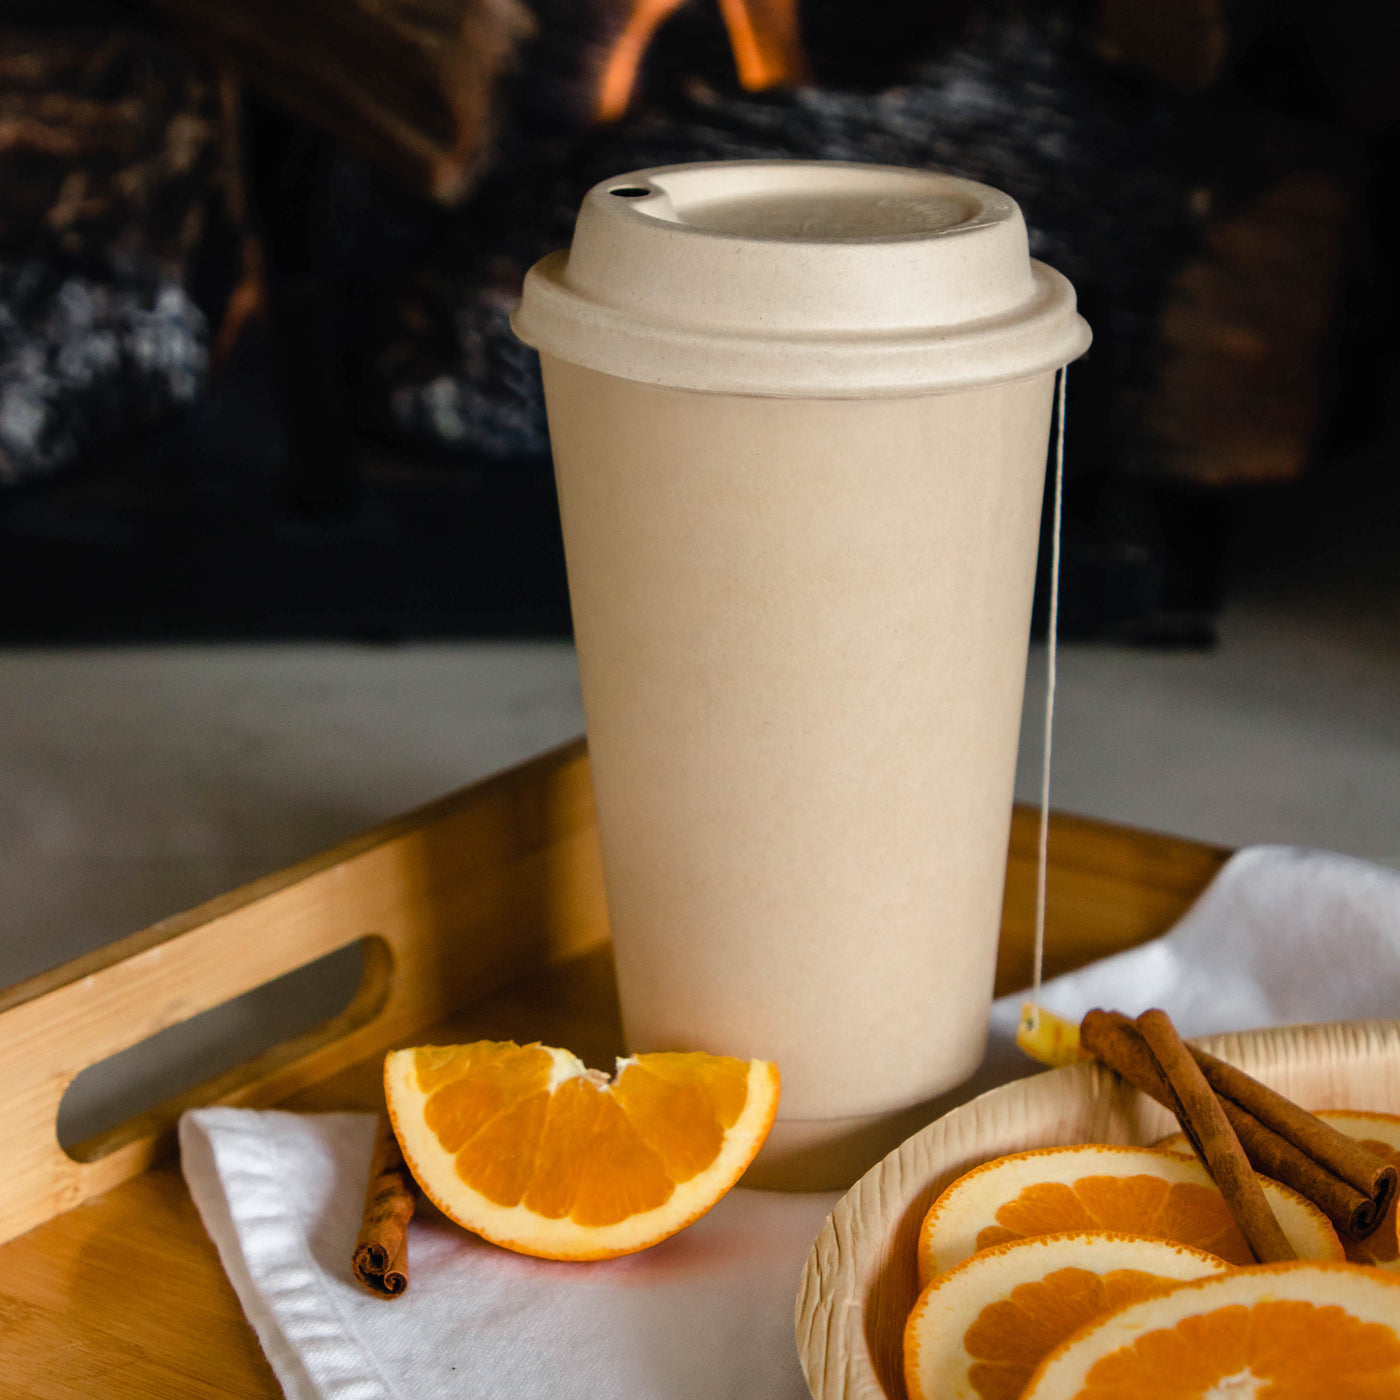 A 16oz compostable hot coffee cup with an orange slice and cinnamon sticks as decoration.